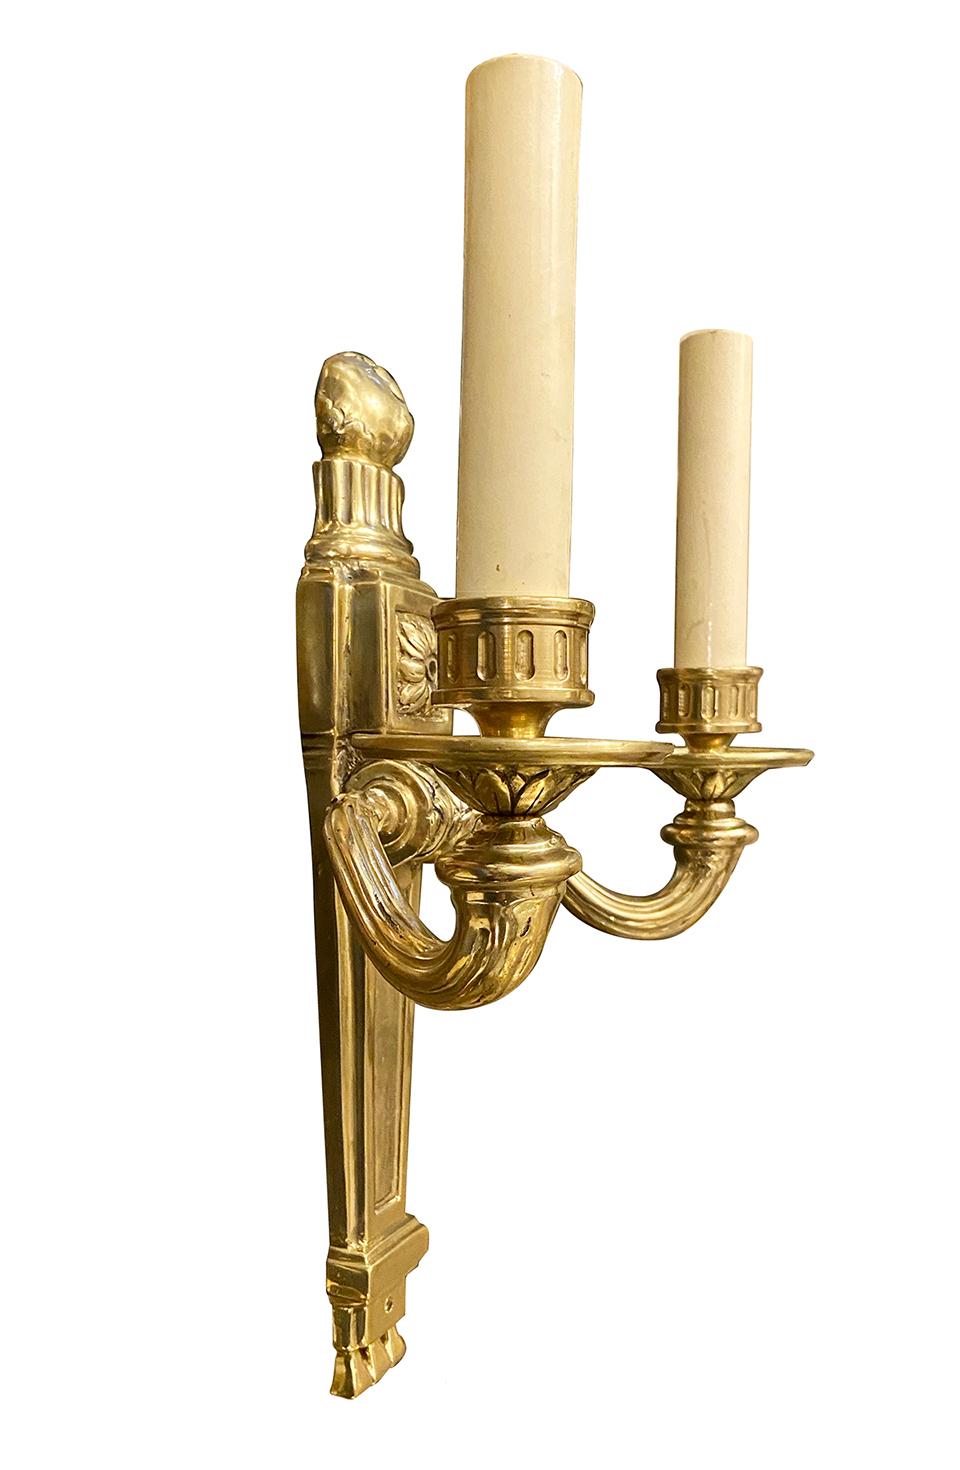 Set of four circa 1920s American neoclassic-style gilt bronze sconces with double arm and with 